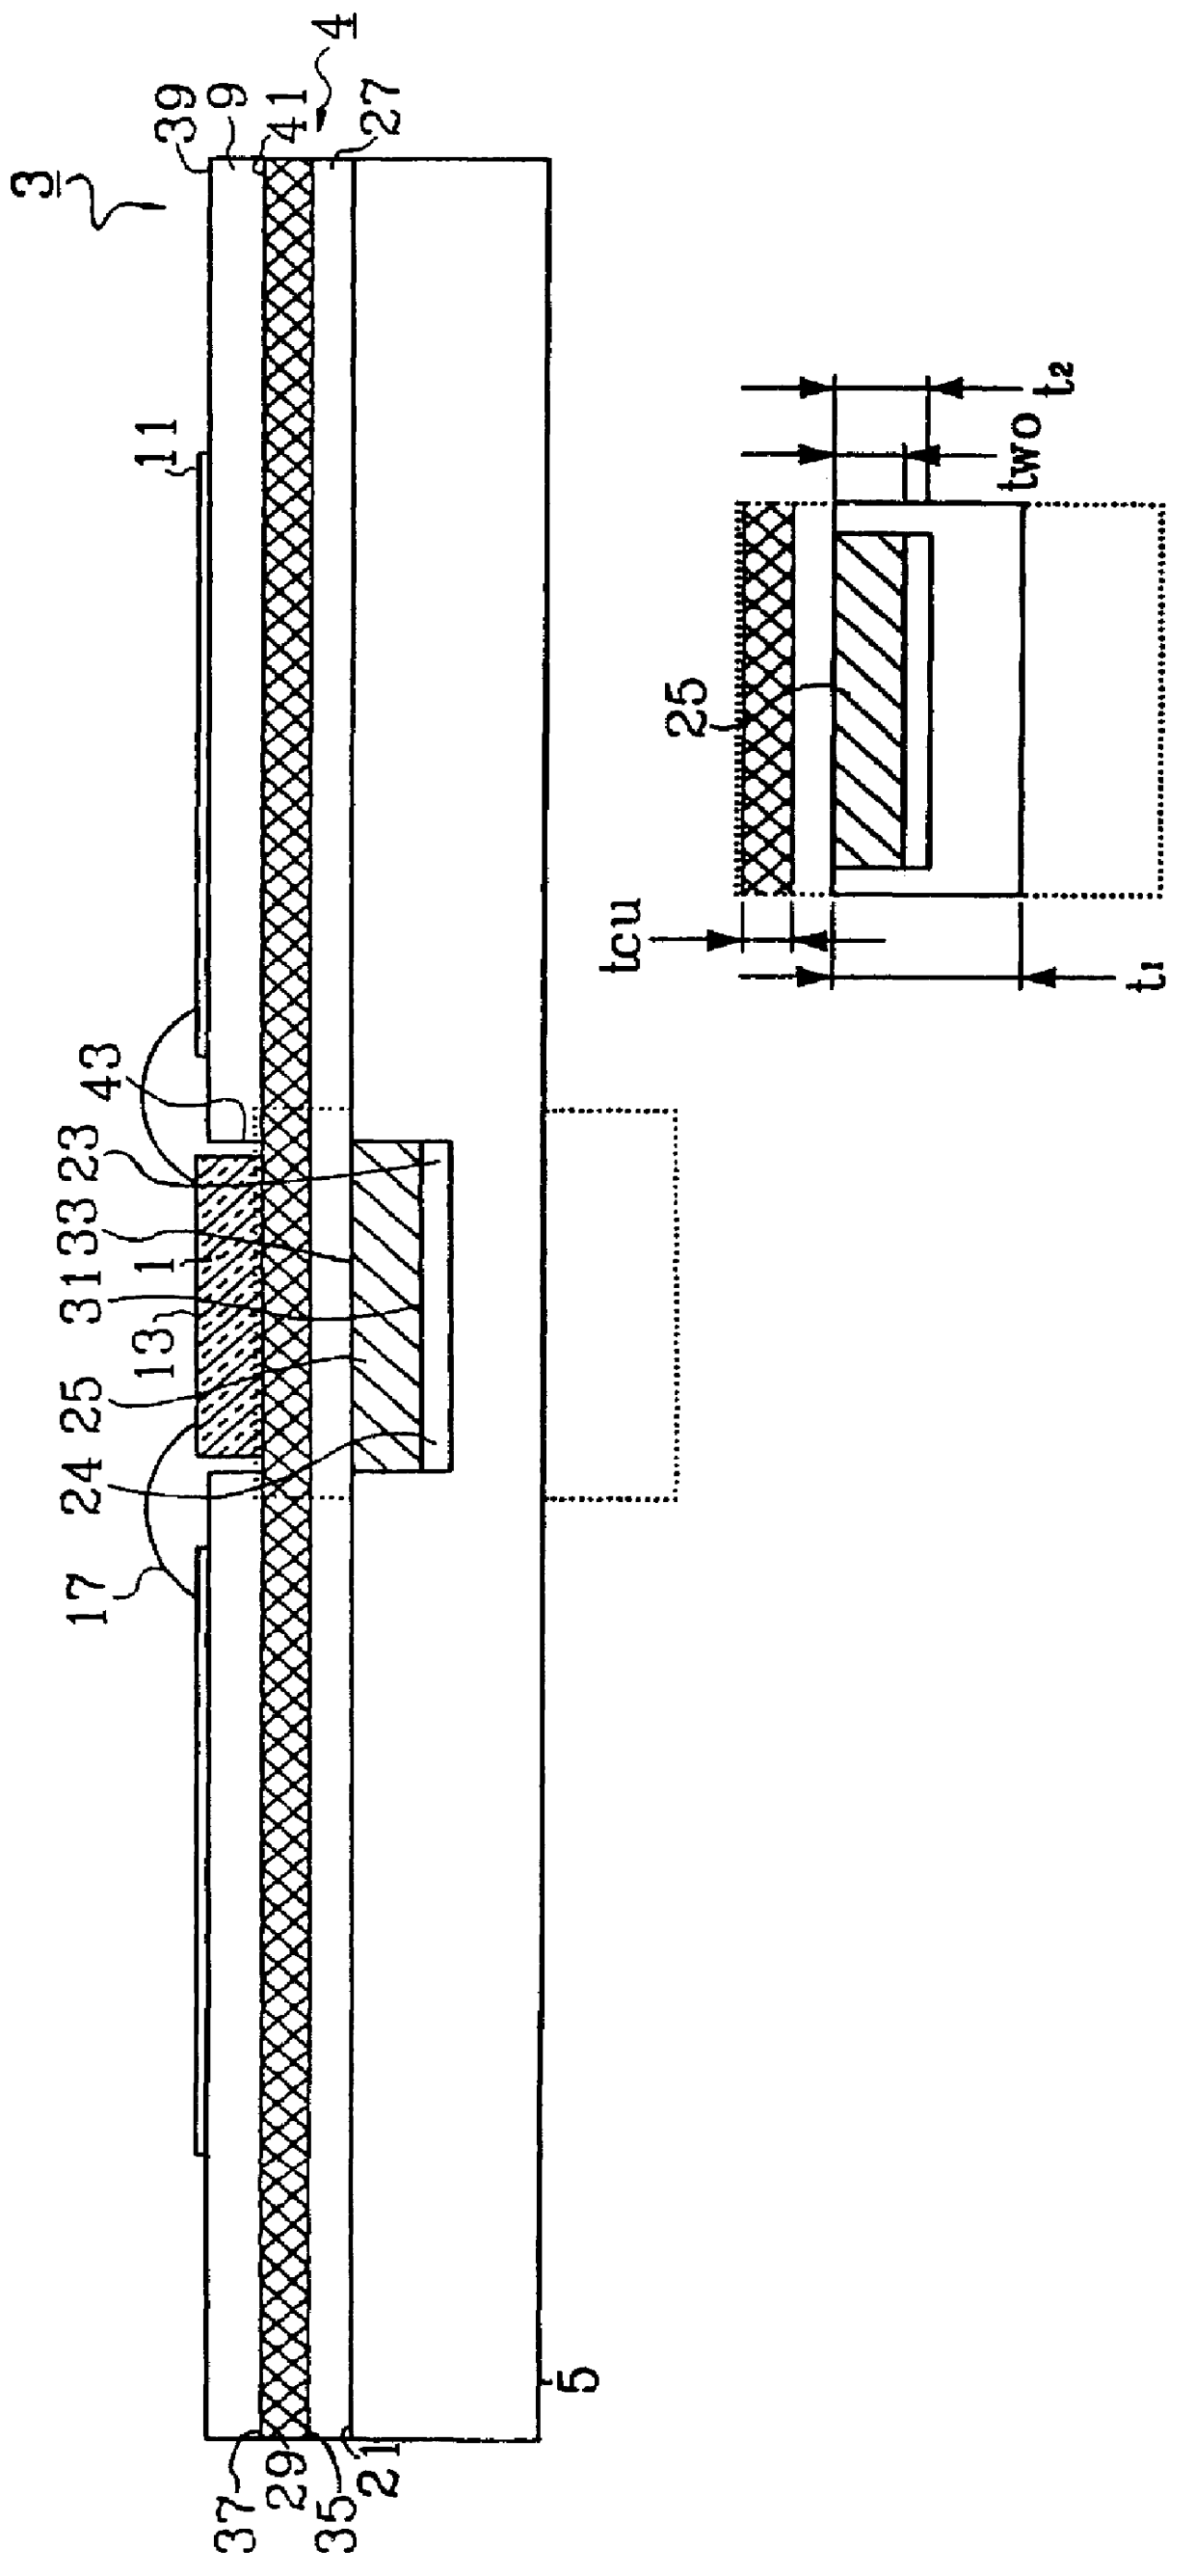 Means and method for mounting electronics